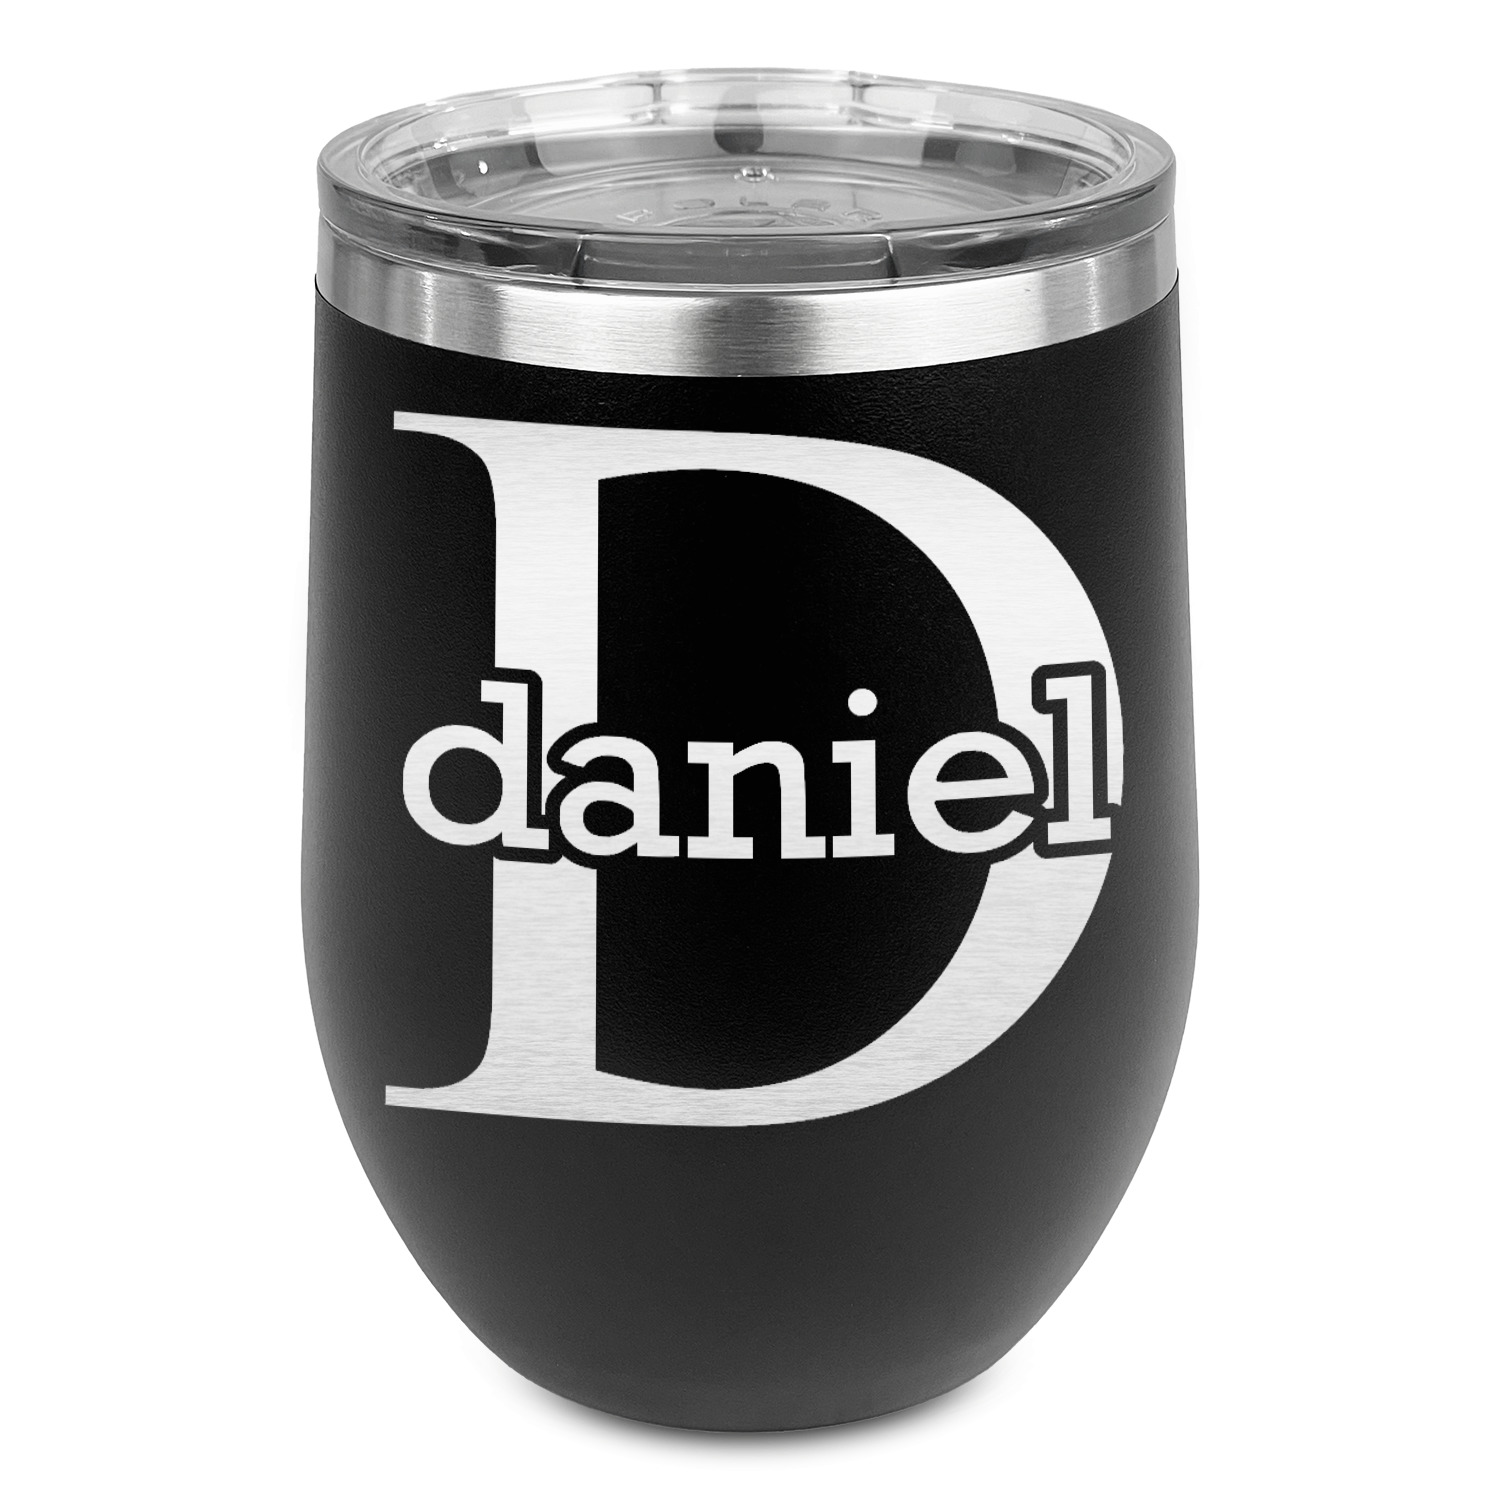 https://www.youcustomizeit.com/common/MAKE/837778/Name-Initial-for-Guys-Stainless-Wine-Tumblers-Black-Single-Sided-Front.jpg?lm=1644253621